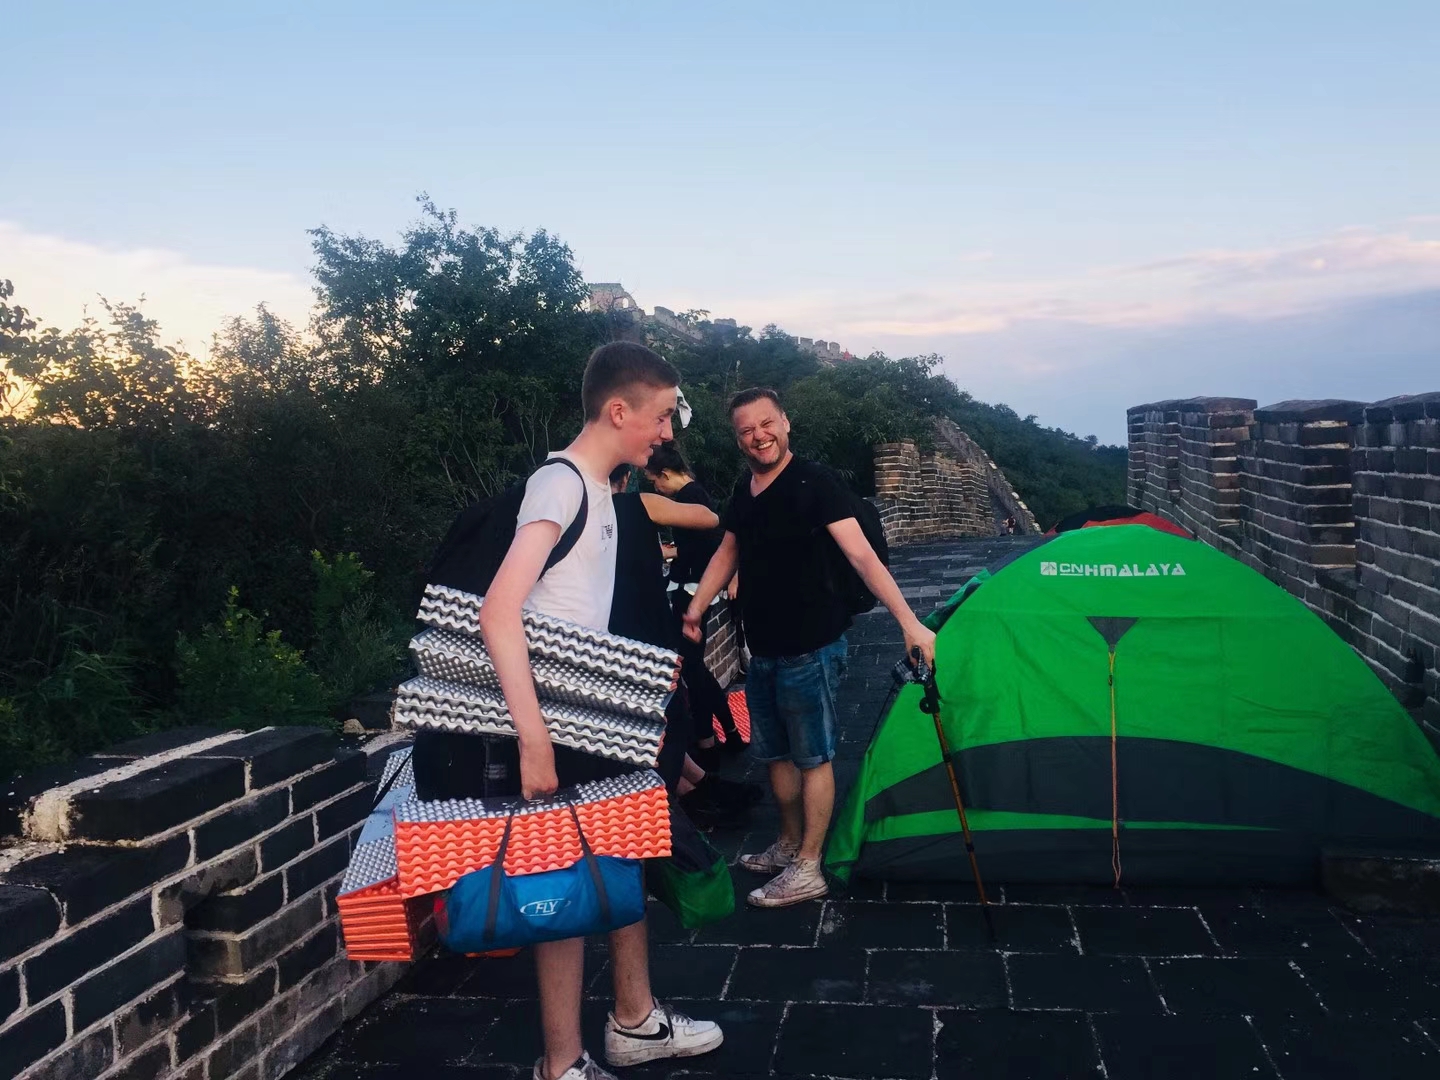 Camping on the Great Wall! 